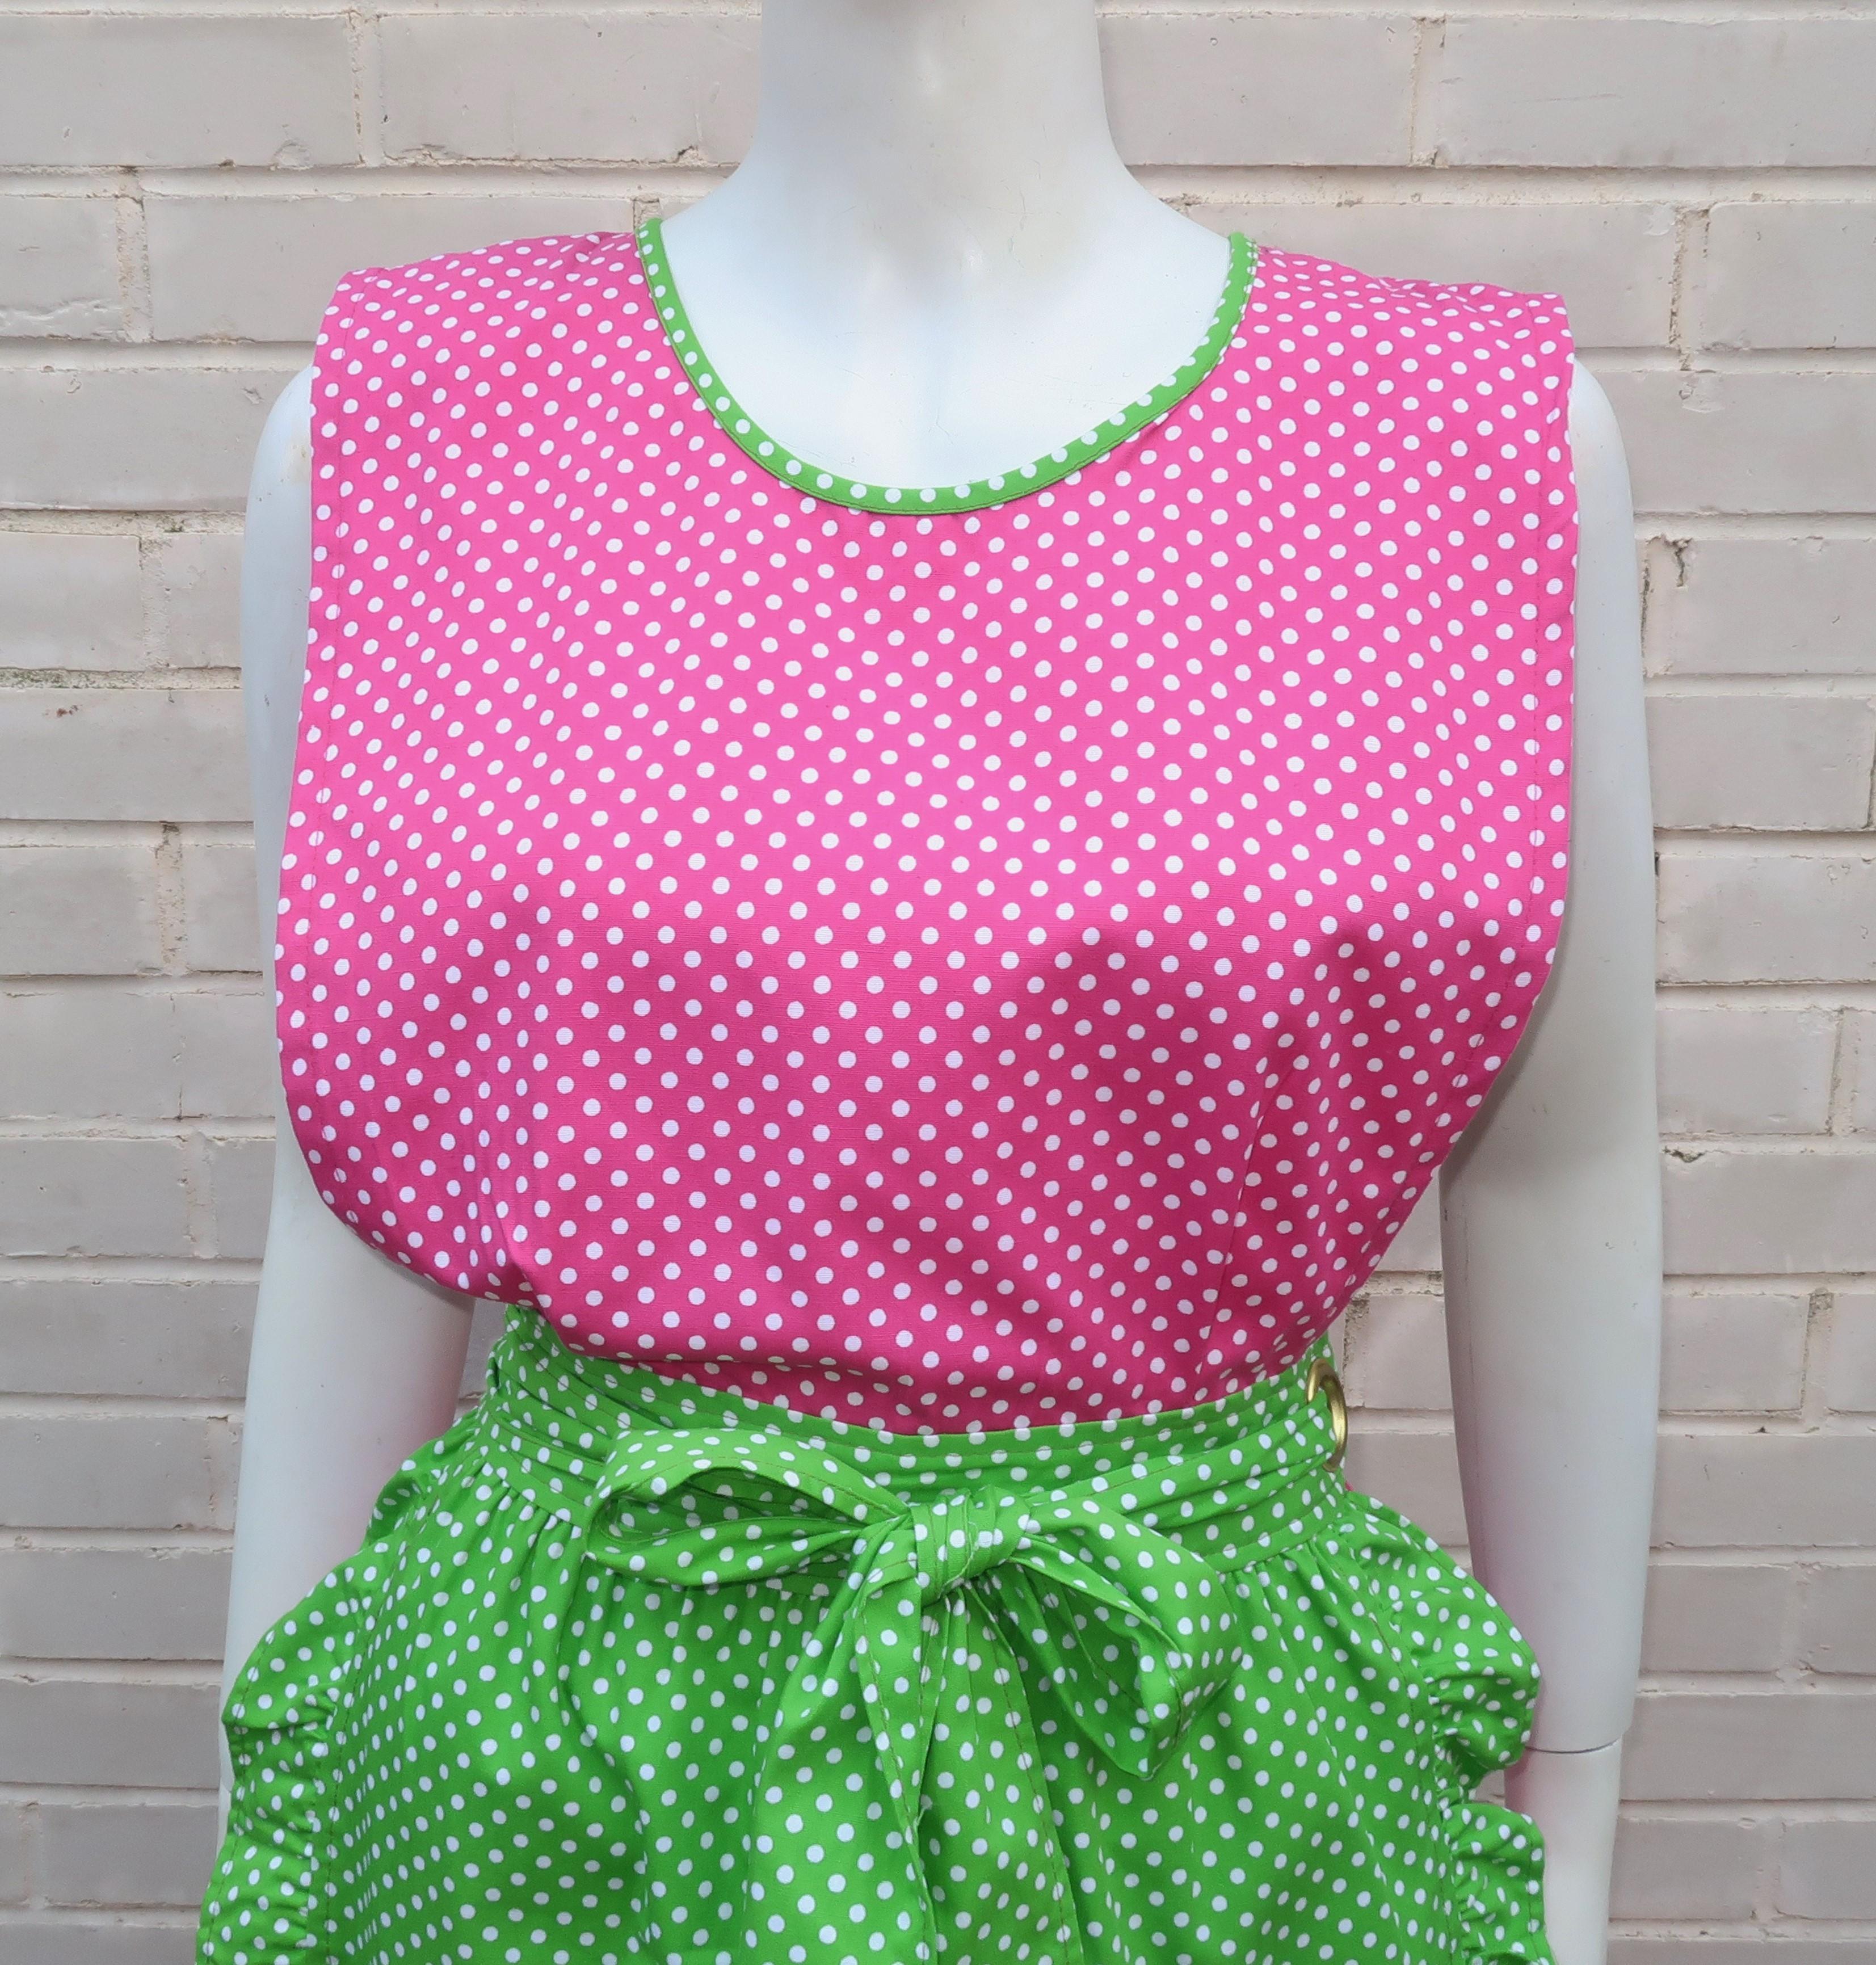 C.1970 pink and green polka dot cotton dress by Design House of Japan.  The maxi dress has a pinafore construction with ties that criss-cross at the back and feed through a large gold tone metal grommet on the side for a wrap effect.  The dress also